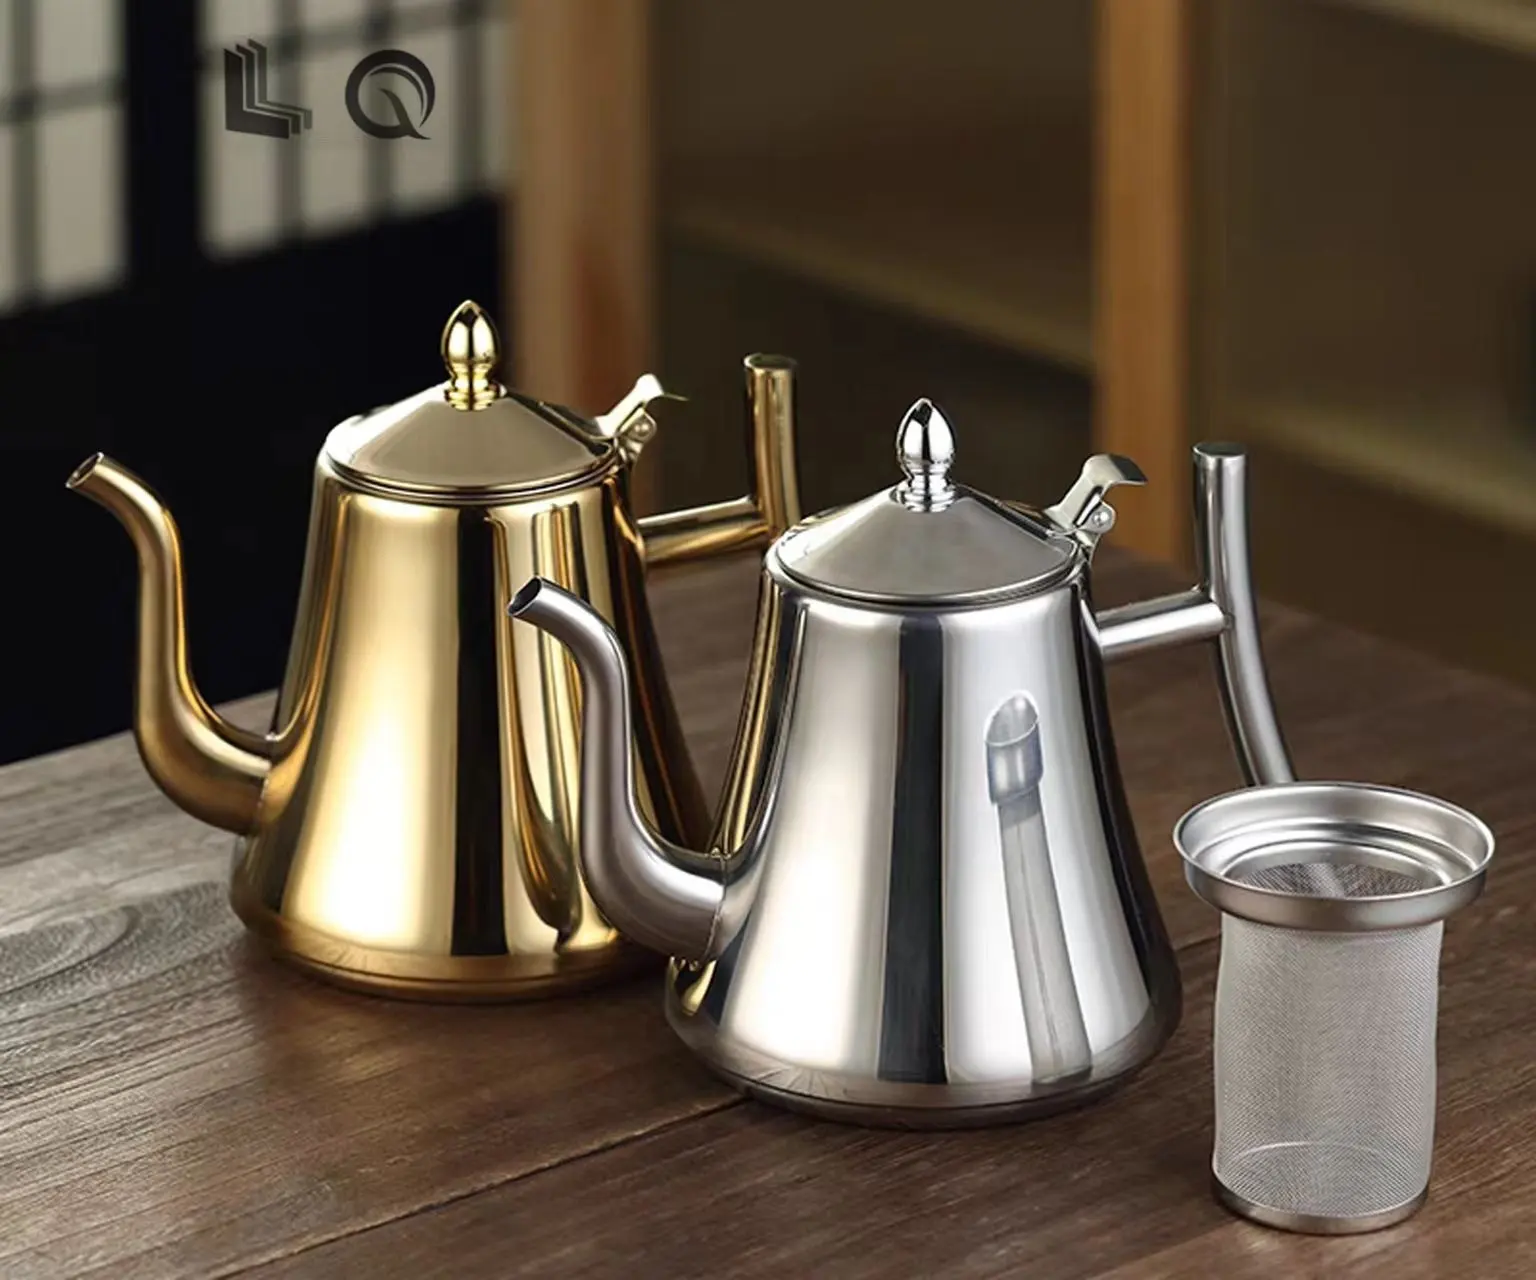 Hot Style Chinese Mirror Polished Pot Food Grade Stainless Steel Coffee Infuser Teapot With Lid And Handle For Hotel Household